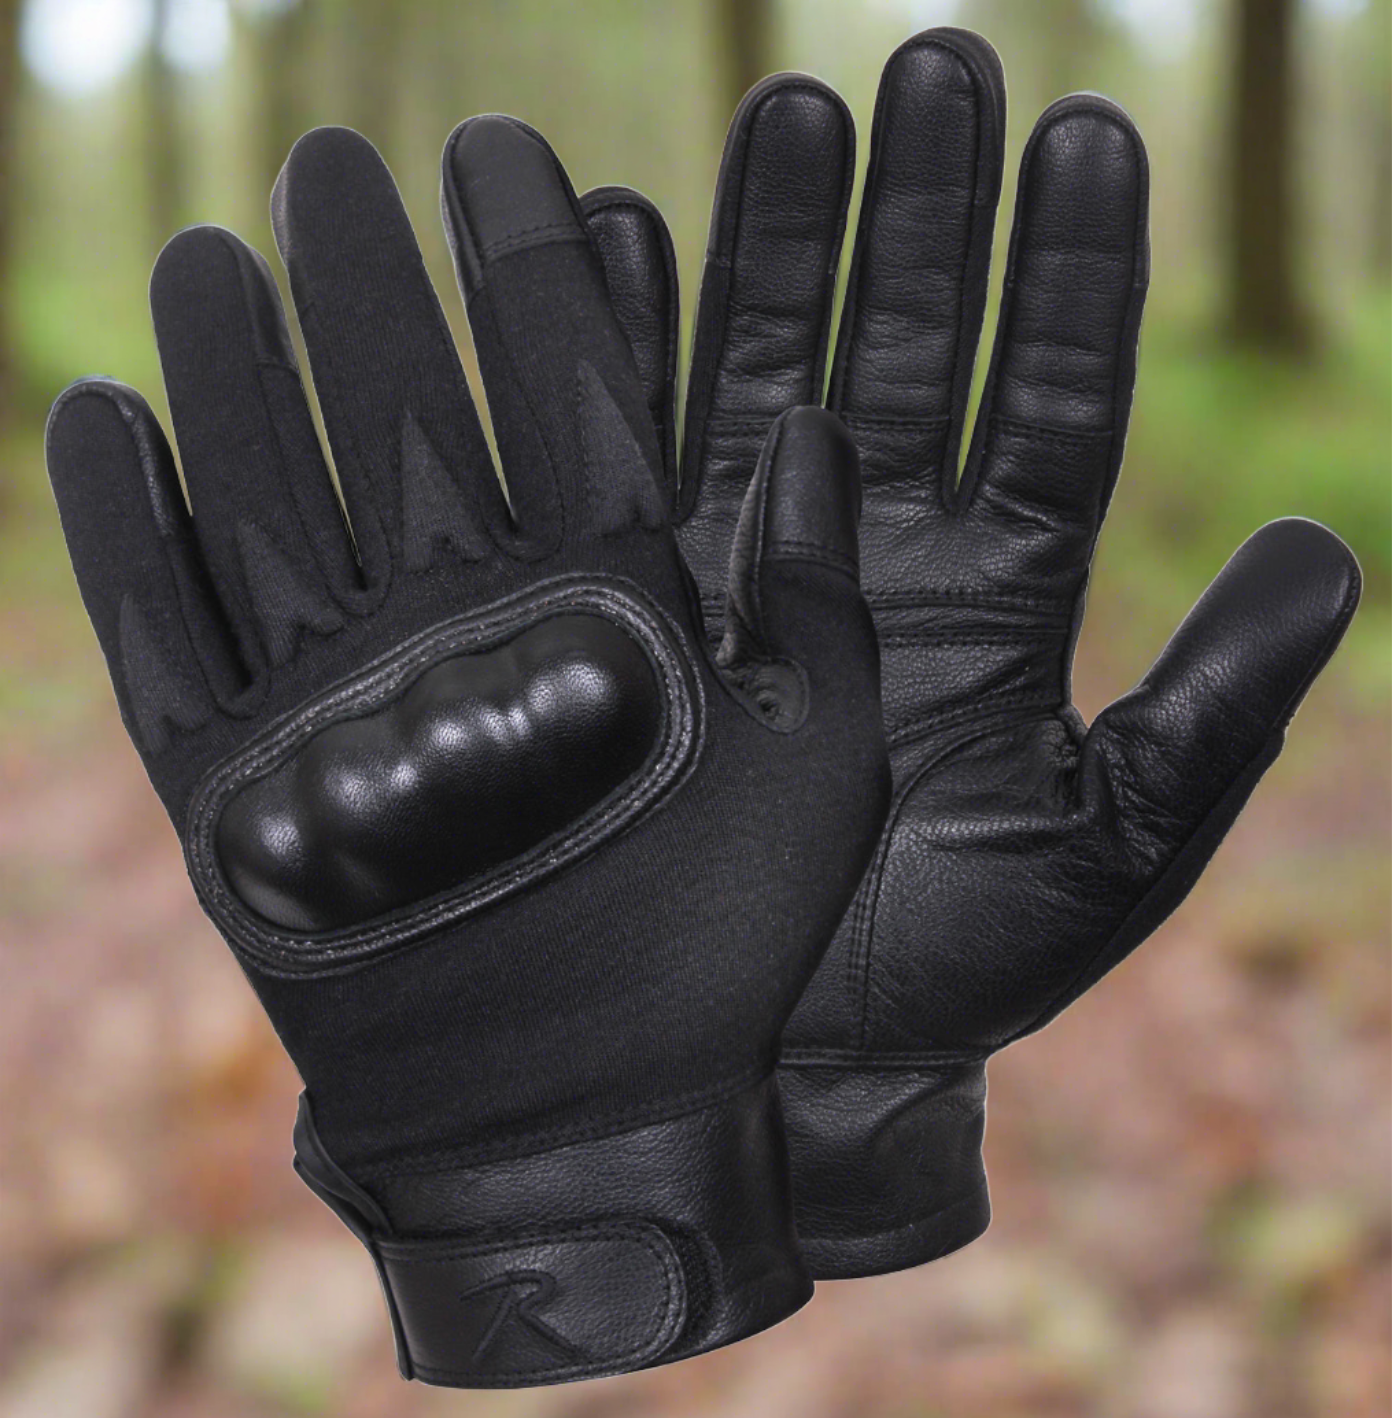 Hard Knuckle Gloves - Rothco Hard Knuckle Cut And Fire Resistant Gloves